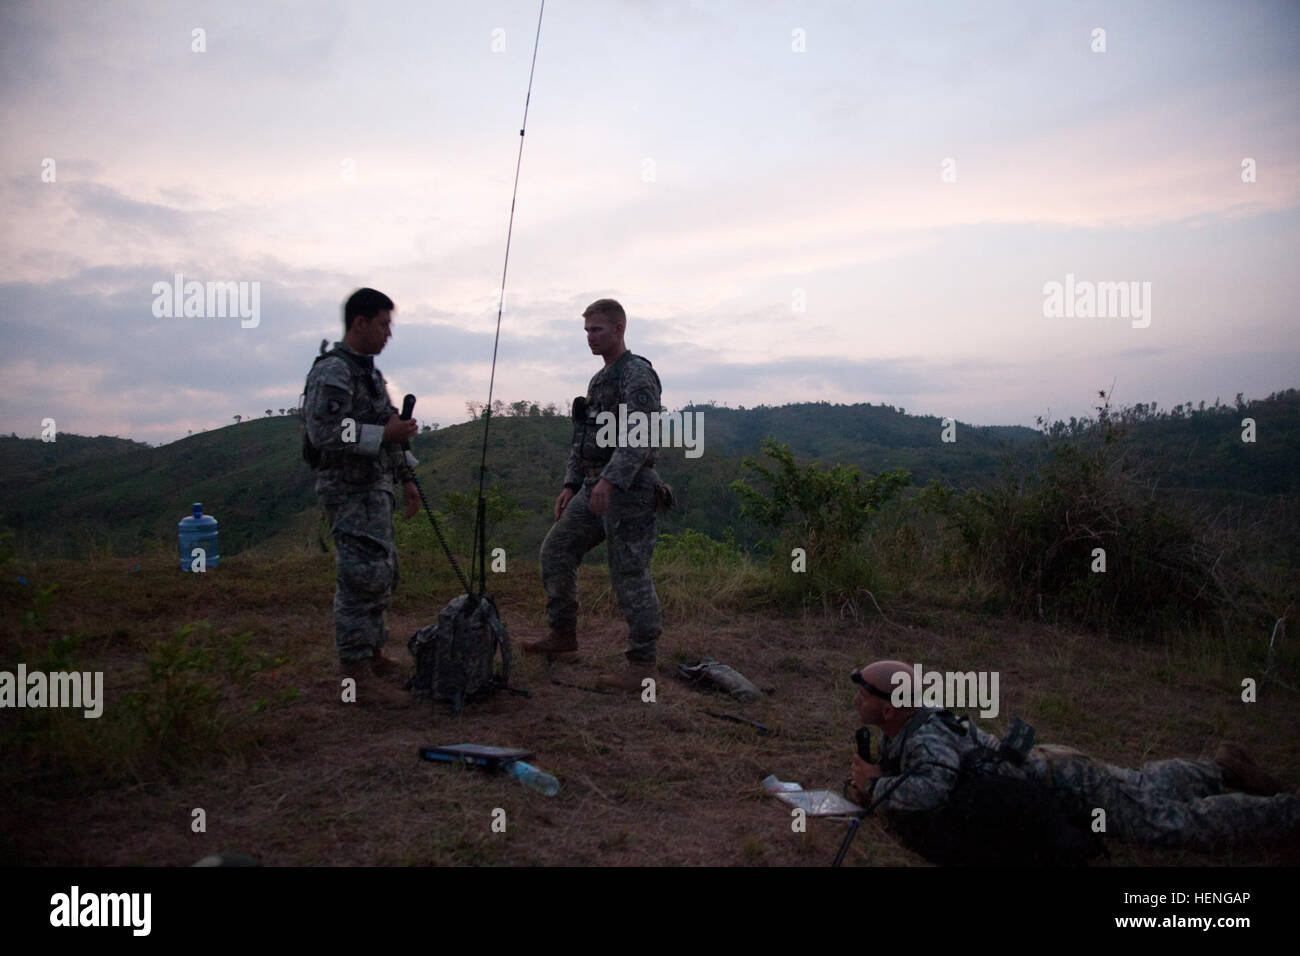 U.S. Army Capt. Gregory Hom, left, Capt. James Hahn, center, and Maj. Joseph Weinburg, right, from 3rd Squadron, 4th Cavalry regiment plan the opposition forces next move for the combined battalion attack training at Fort Magsaysay, Philippines during Balikatan 2014, May 15, 2014.  The battalion attack is a culminating exercise that tests the interoperability between the Armed Forces of the Philippines and U.S. Soldiers.  This year marks 30th iteration of the exercise, which is an annual Republic of the Philippines-U.S. military bilateral training engagement.  (U.S. Army photo by Sgt. 1st Clas Stock Photo